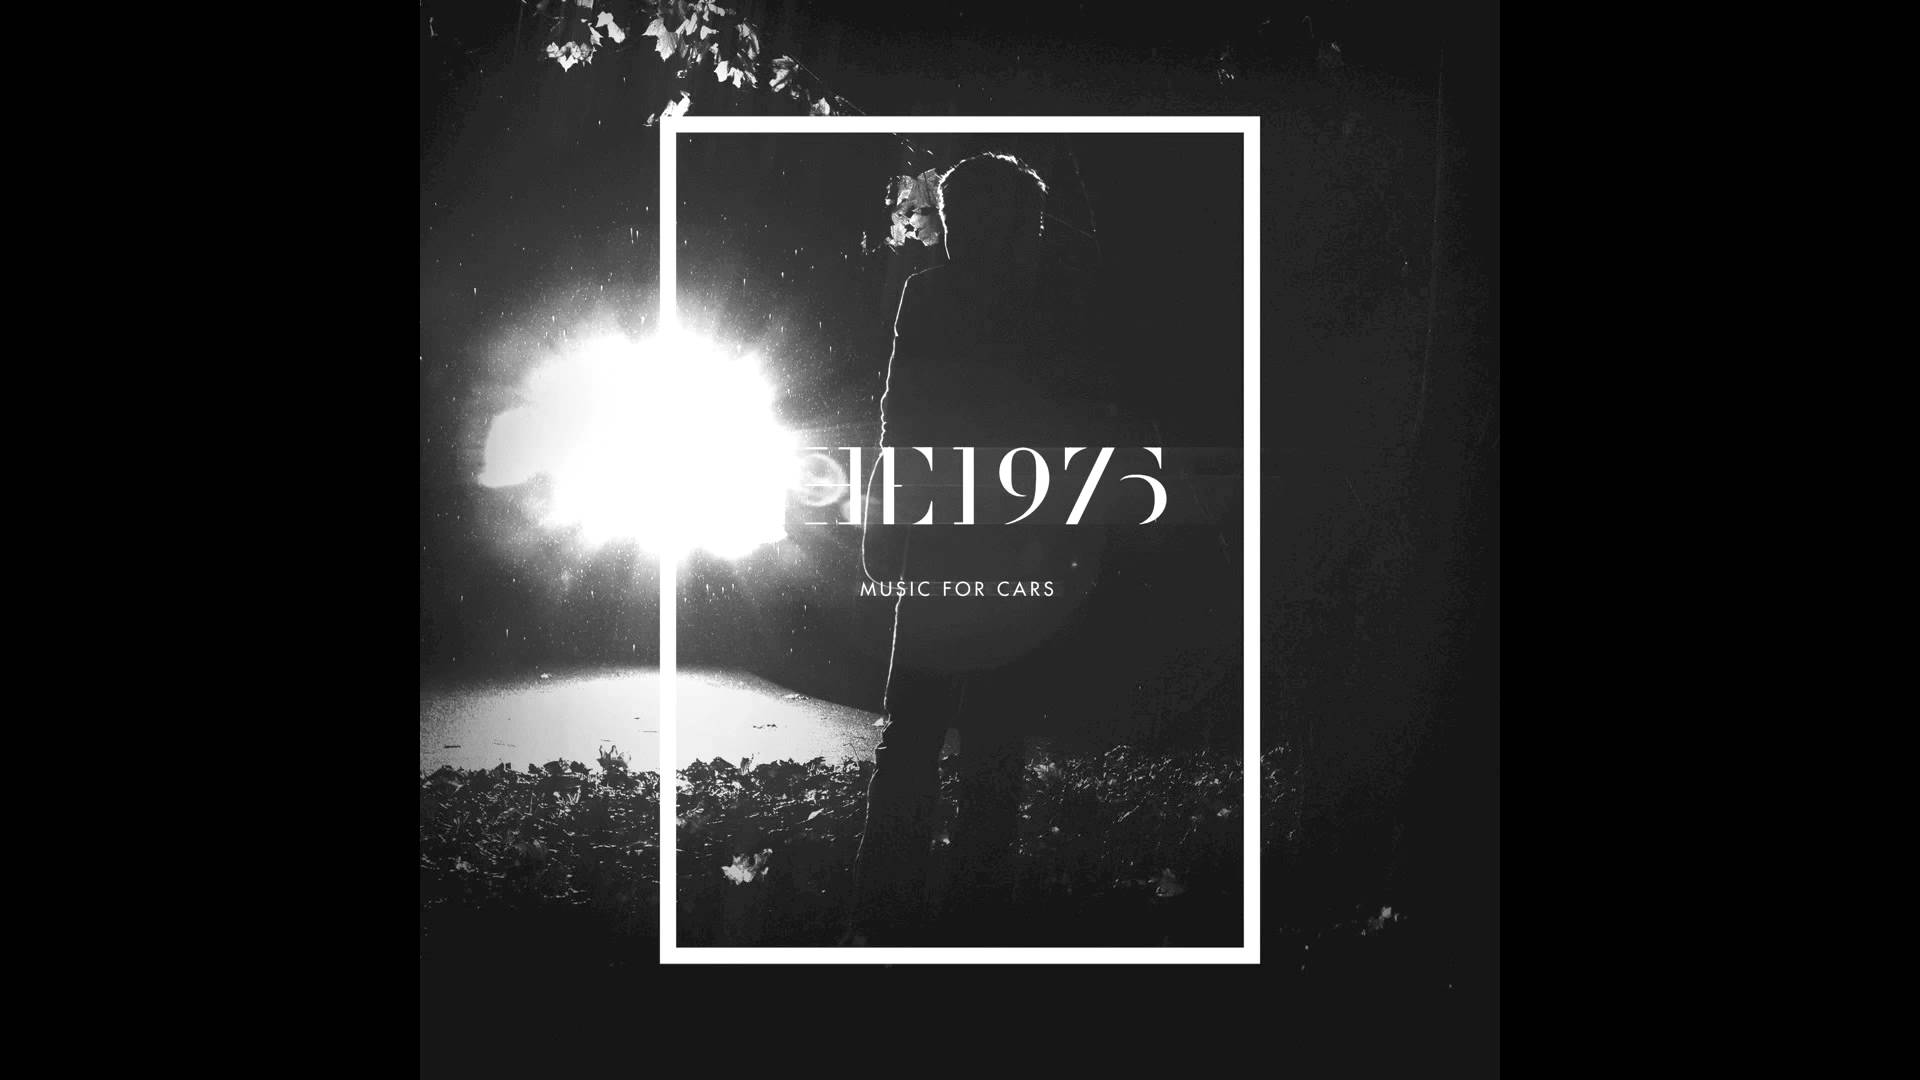 The 1975 - Me